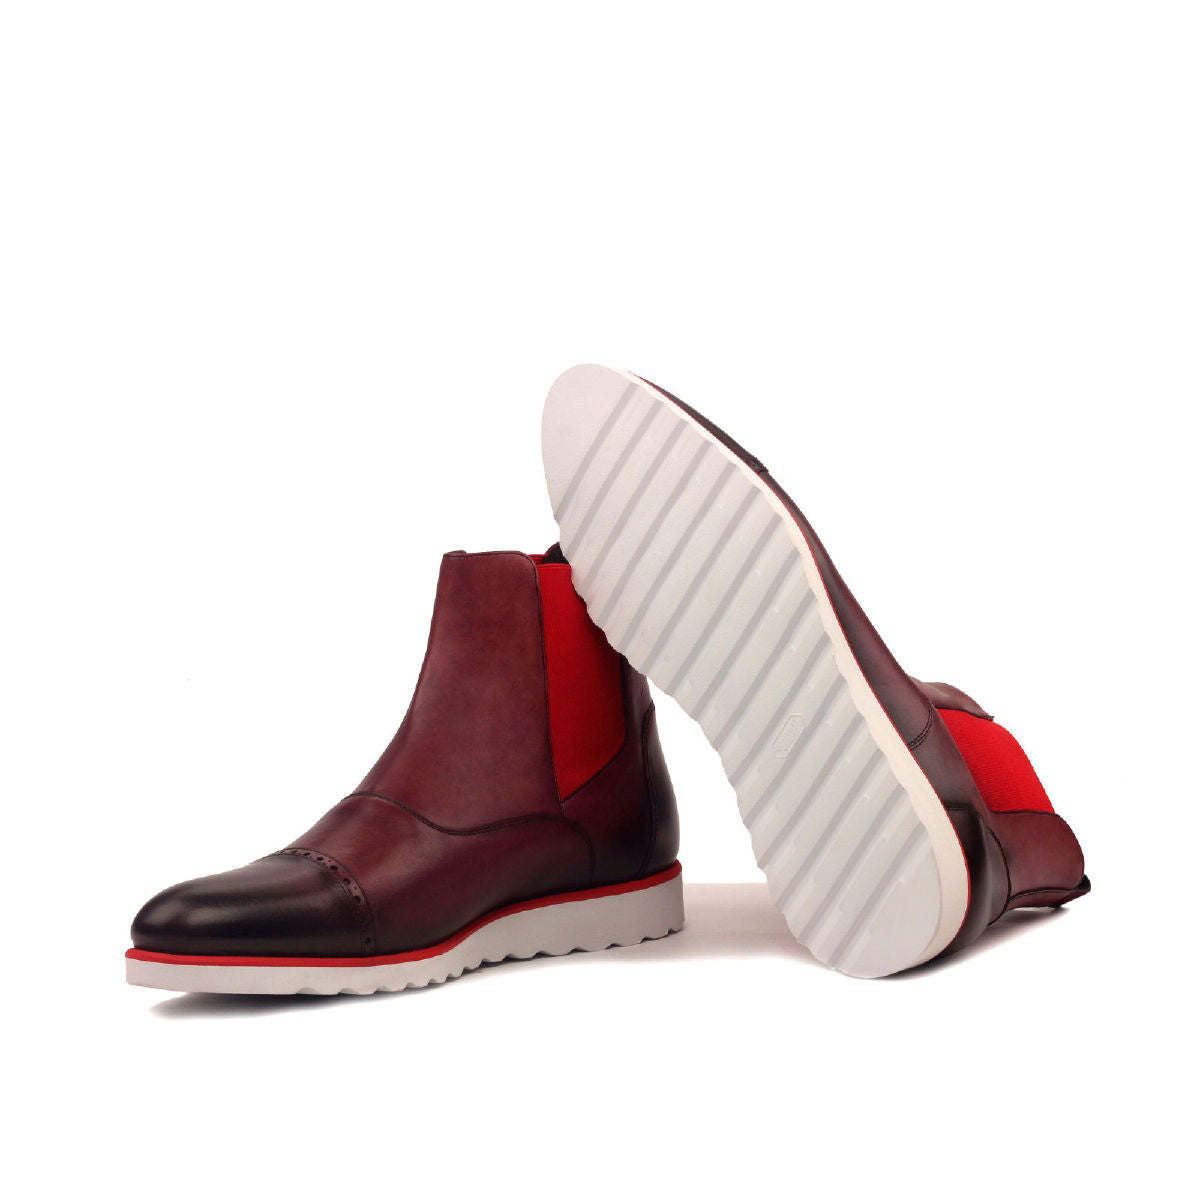 Burgundy Chelsea Boot with Sport Wedge